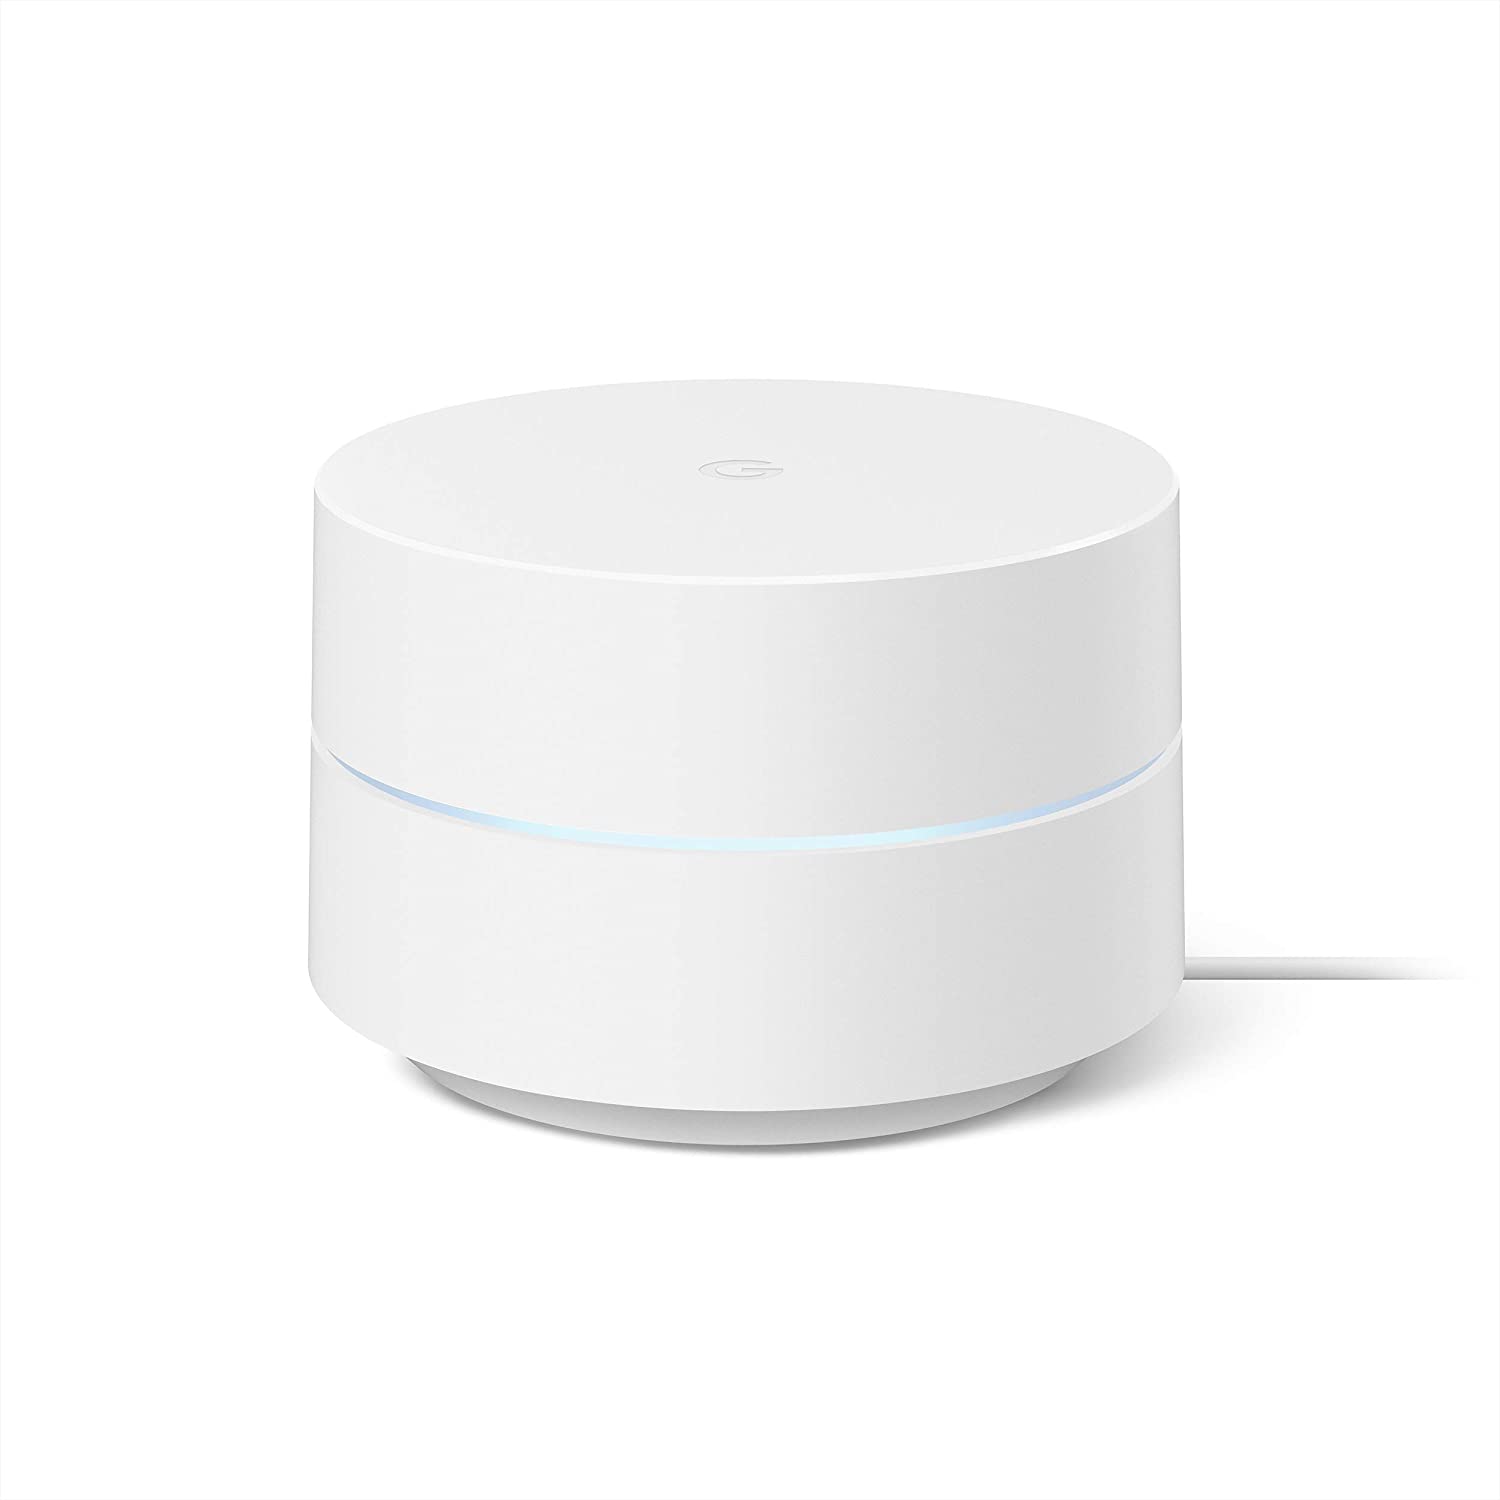 Google Wifi - AC1200 - Mesh WiFi System - Wifi Router - 1500 Sq Ft Coverage